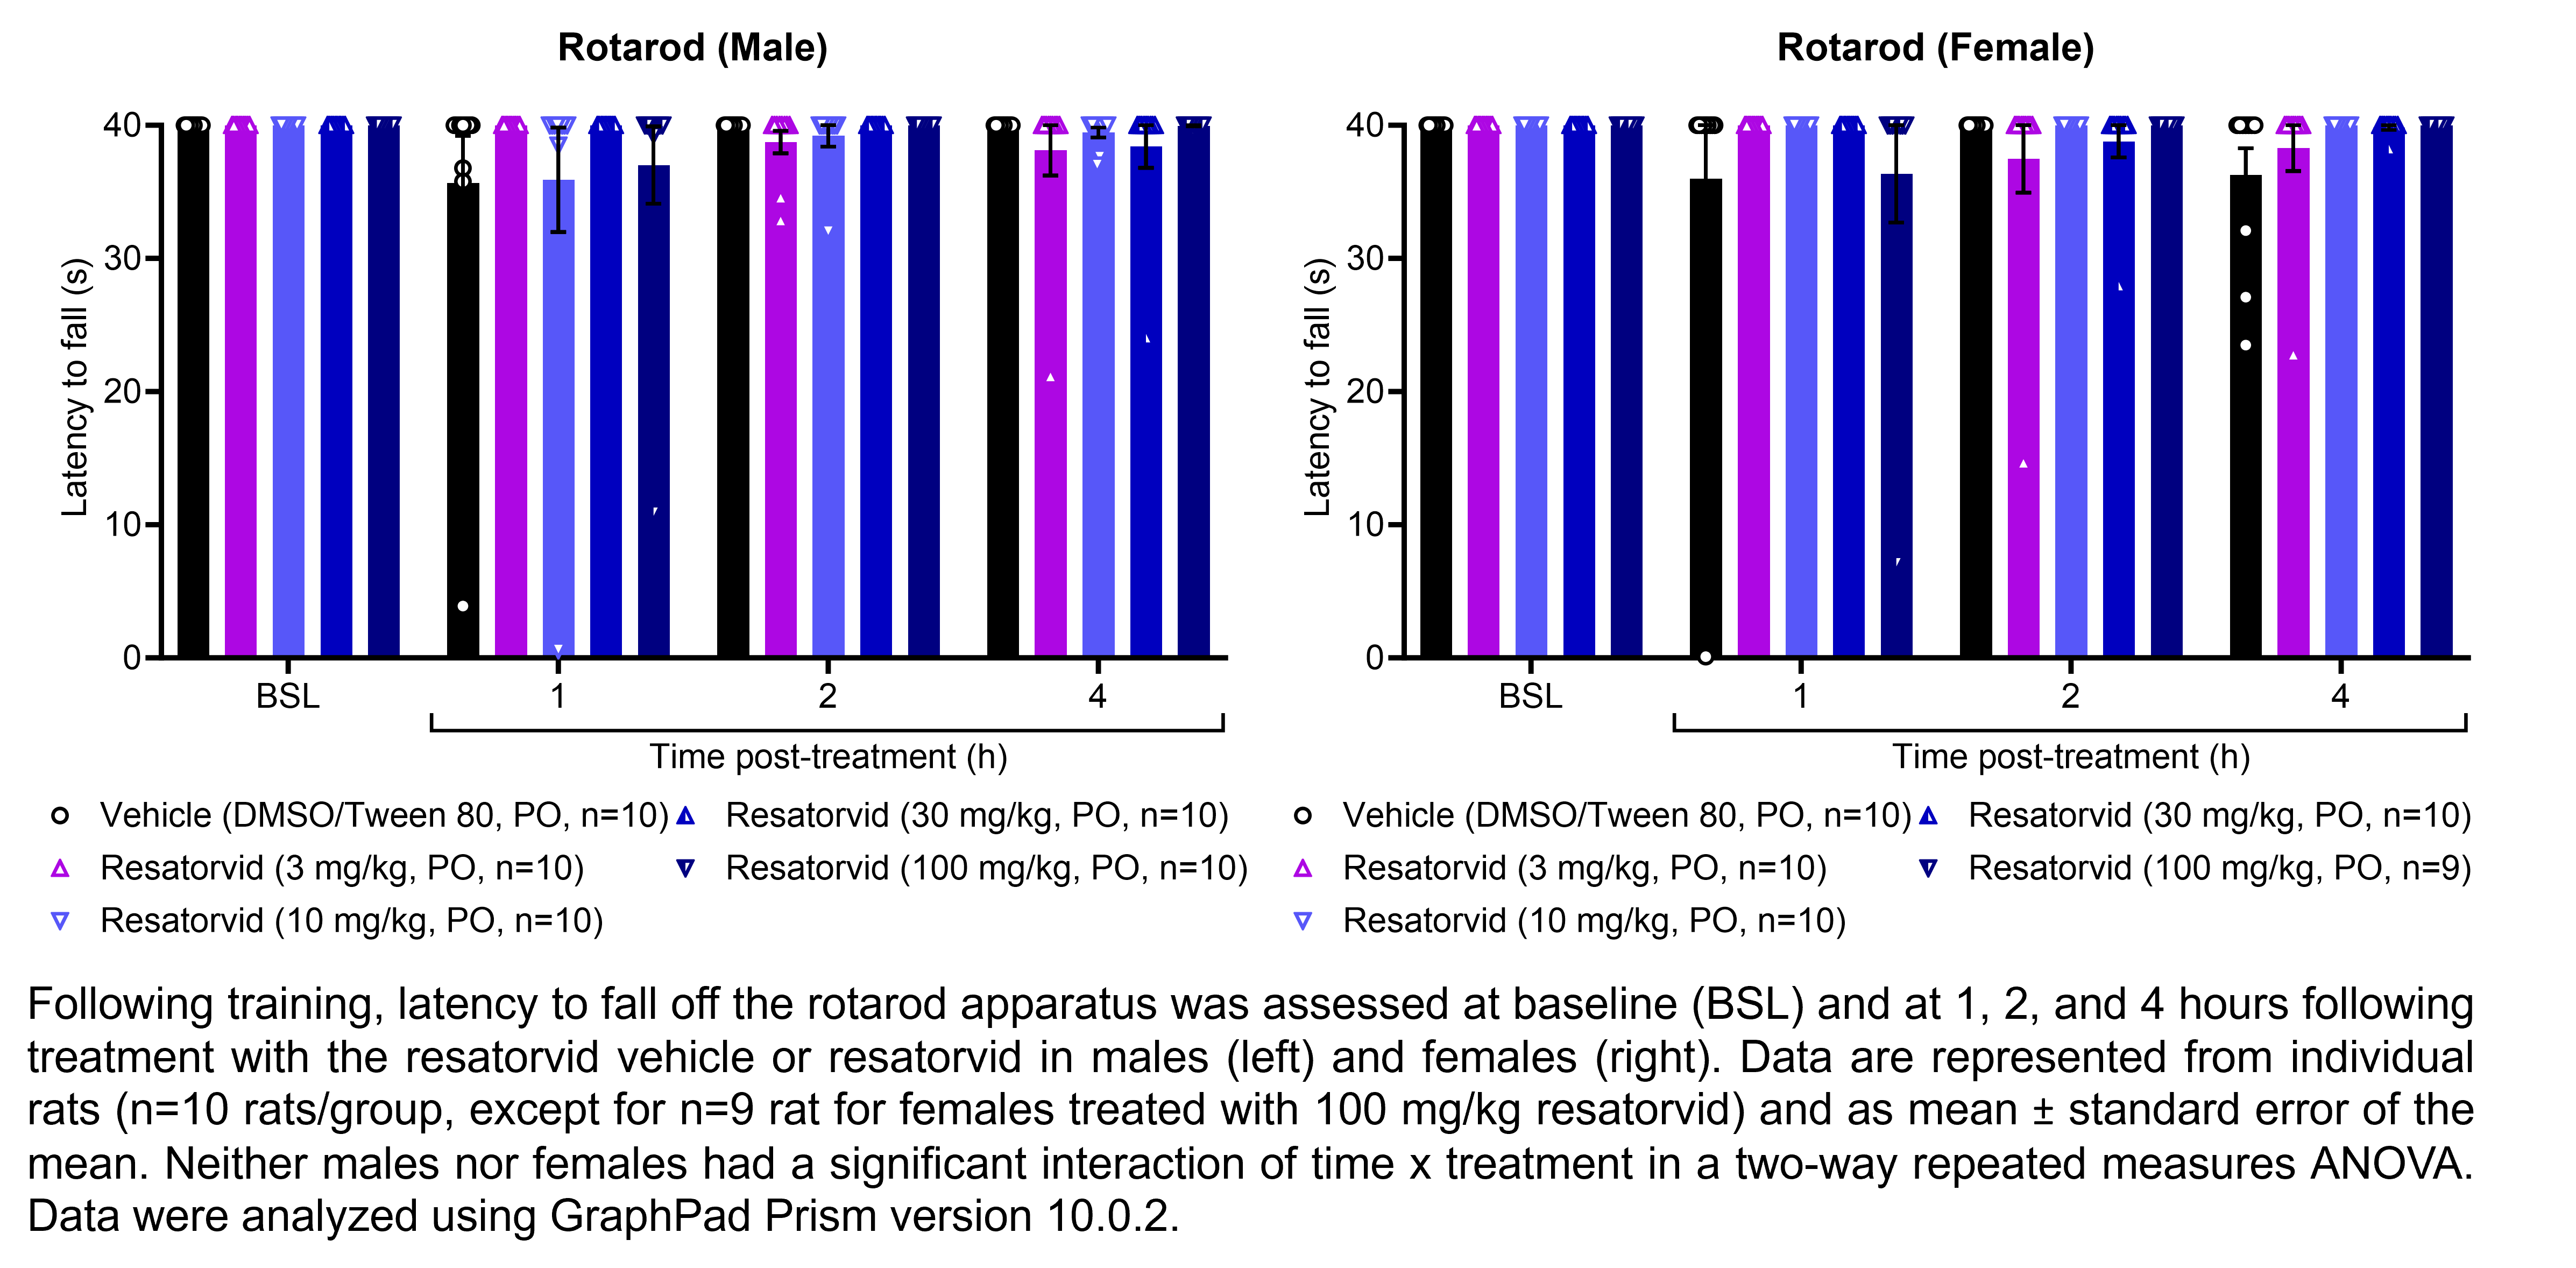 Two graphs show the latency for male or female rats to fall off a rotarod apparatus. Responses are shown at the following time points: baseline (before treatment) and at 1, 2, and 4 hours after treatment with vehicle (10% DMSO and 5% Tween 80 in water, delivered PO) or resatorvid (3, 10, 30, or 100 mg/kg, delivered PO). There were 10 rats per group. Neither males nor females had a significant interaction of time x treatment in a two-way repeated measures ANOVA.